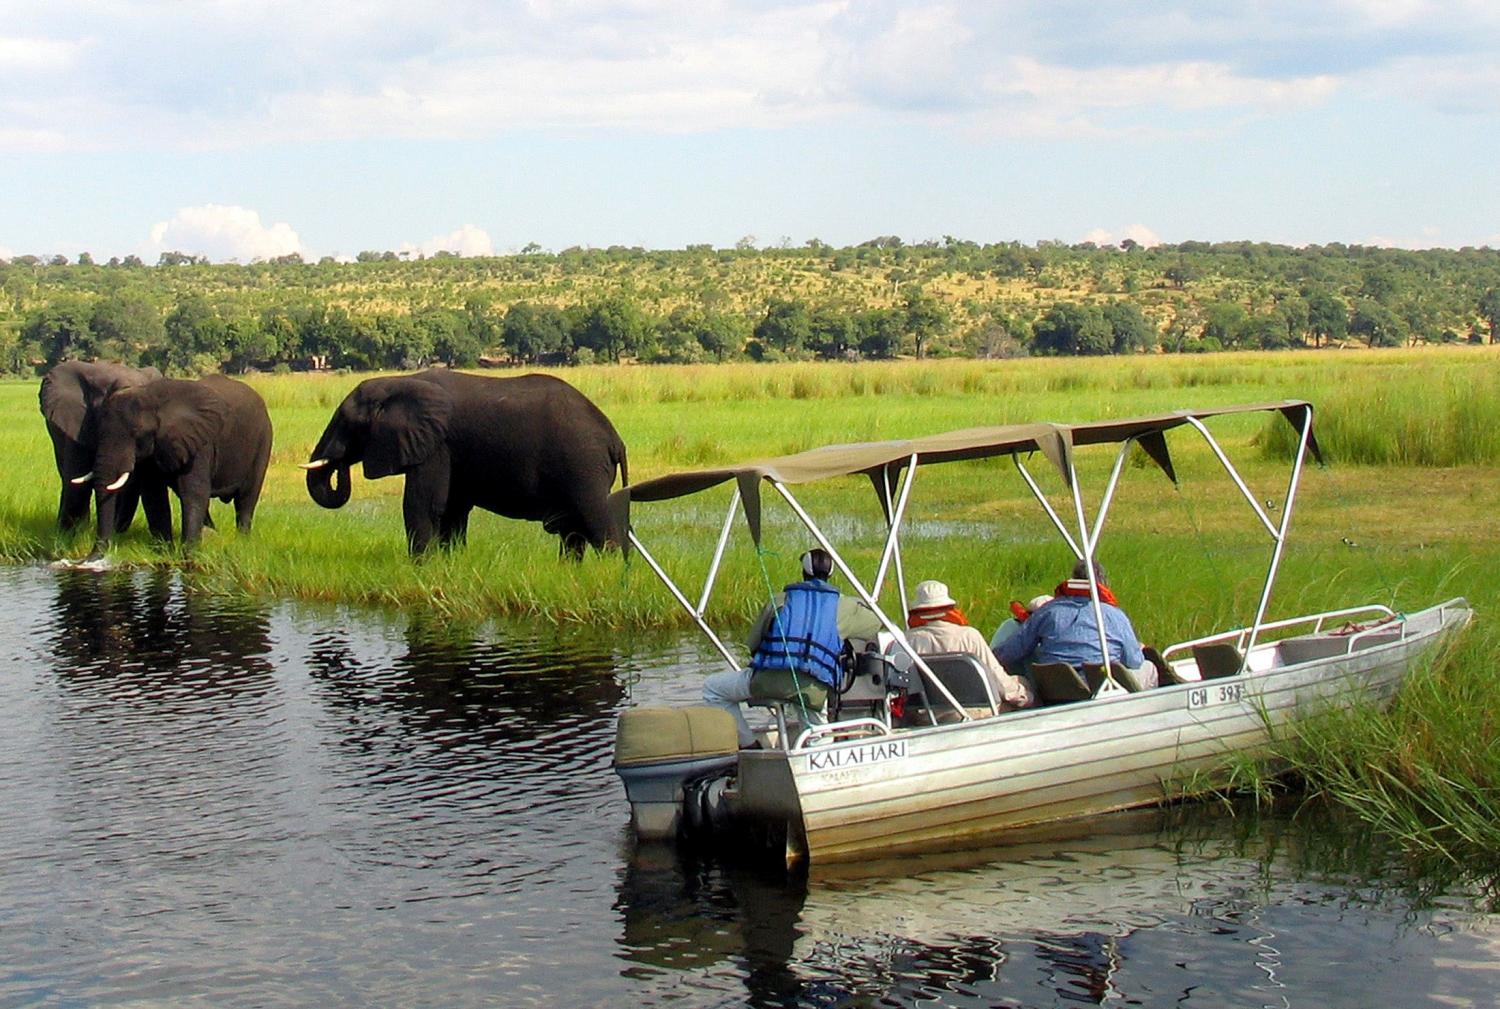 Foreign tourists in safari riverboats observe elephants along the Chobe river bank near Botswana's northern border where Zimbabwe, Zambia and Namibia meet, March 4, 2005. REUTERS/Peter Apps/File Photo